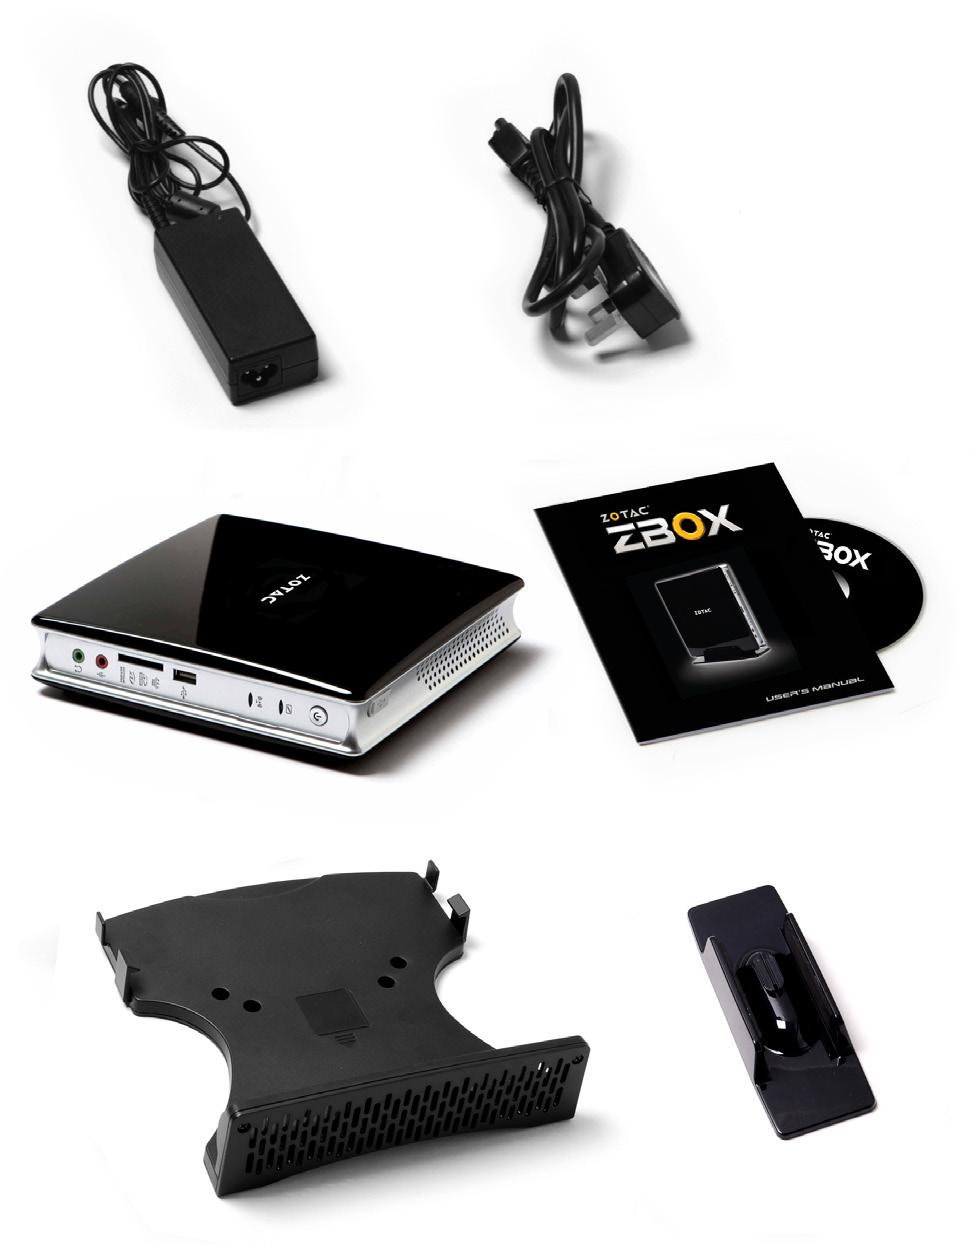 Welcome Congratulations on your purchase of the ZOTAC ZBOX. The following illustration displays the package contents of your new ZOTAC ZBOX.